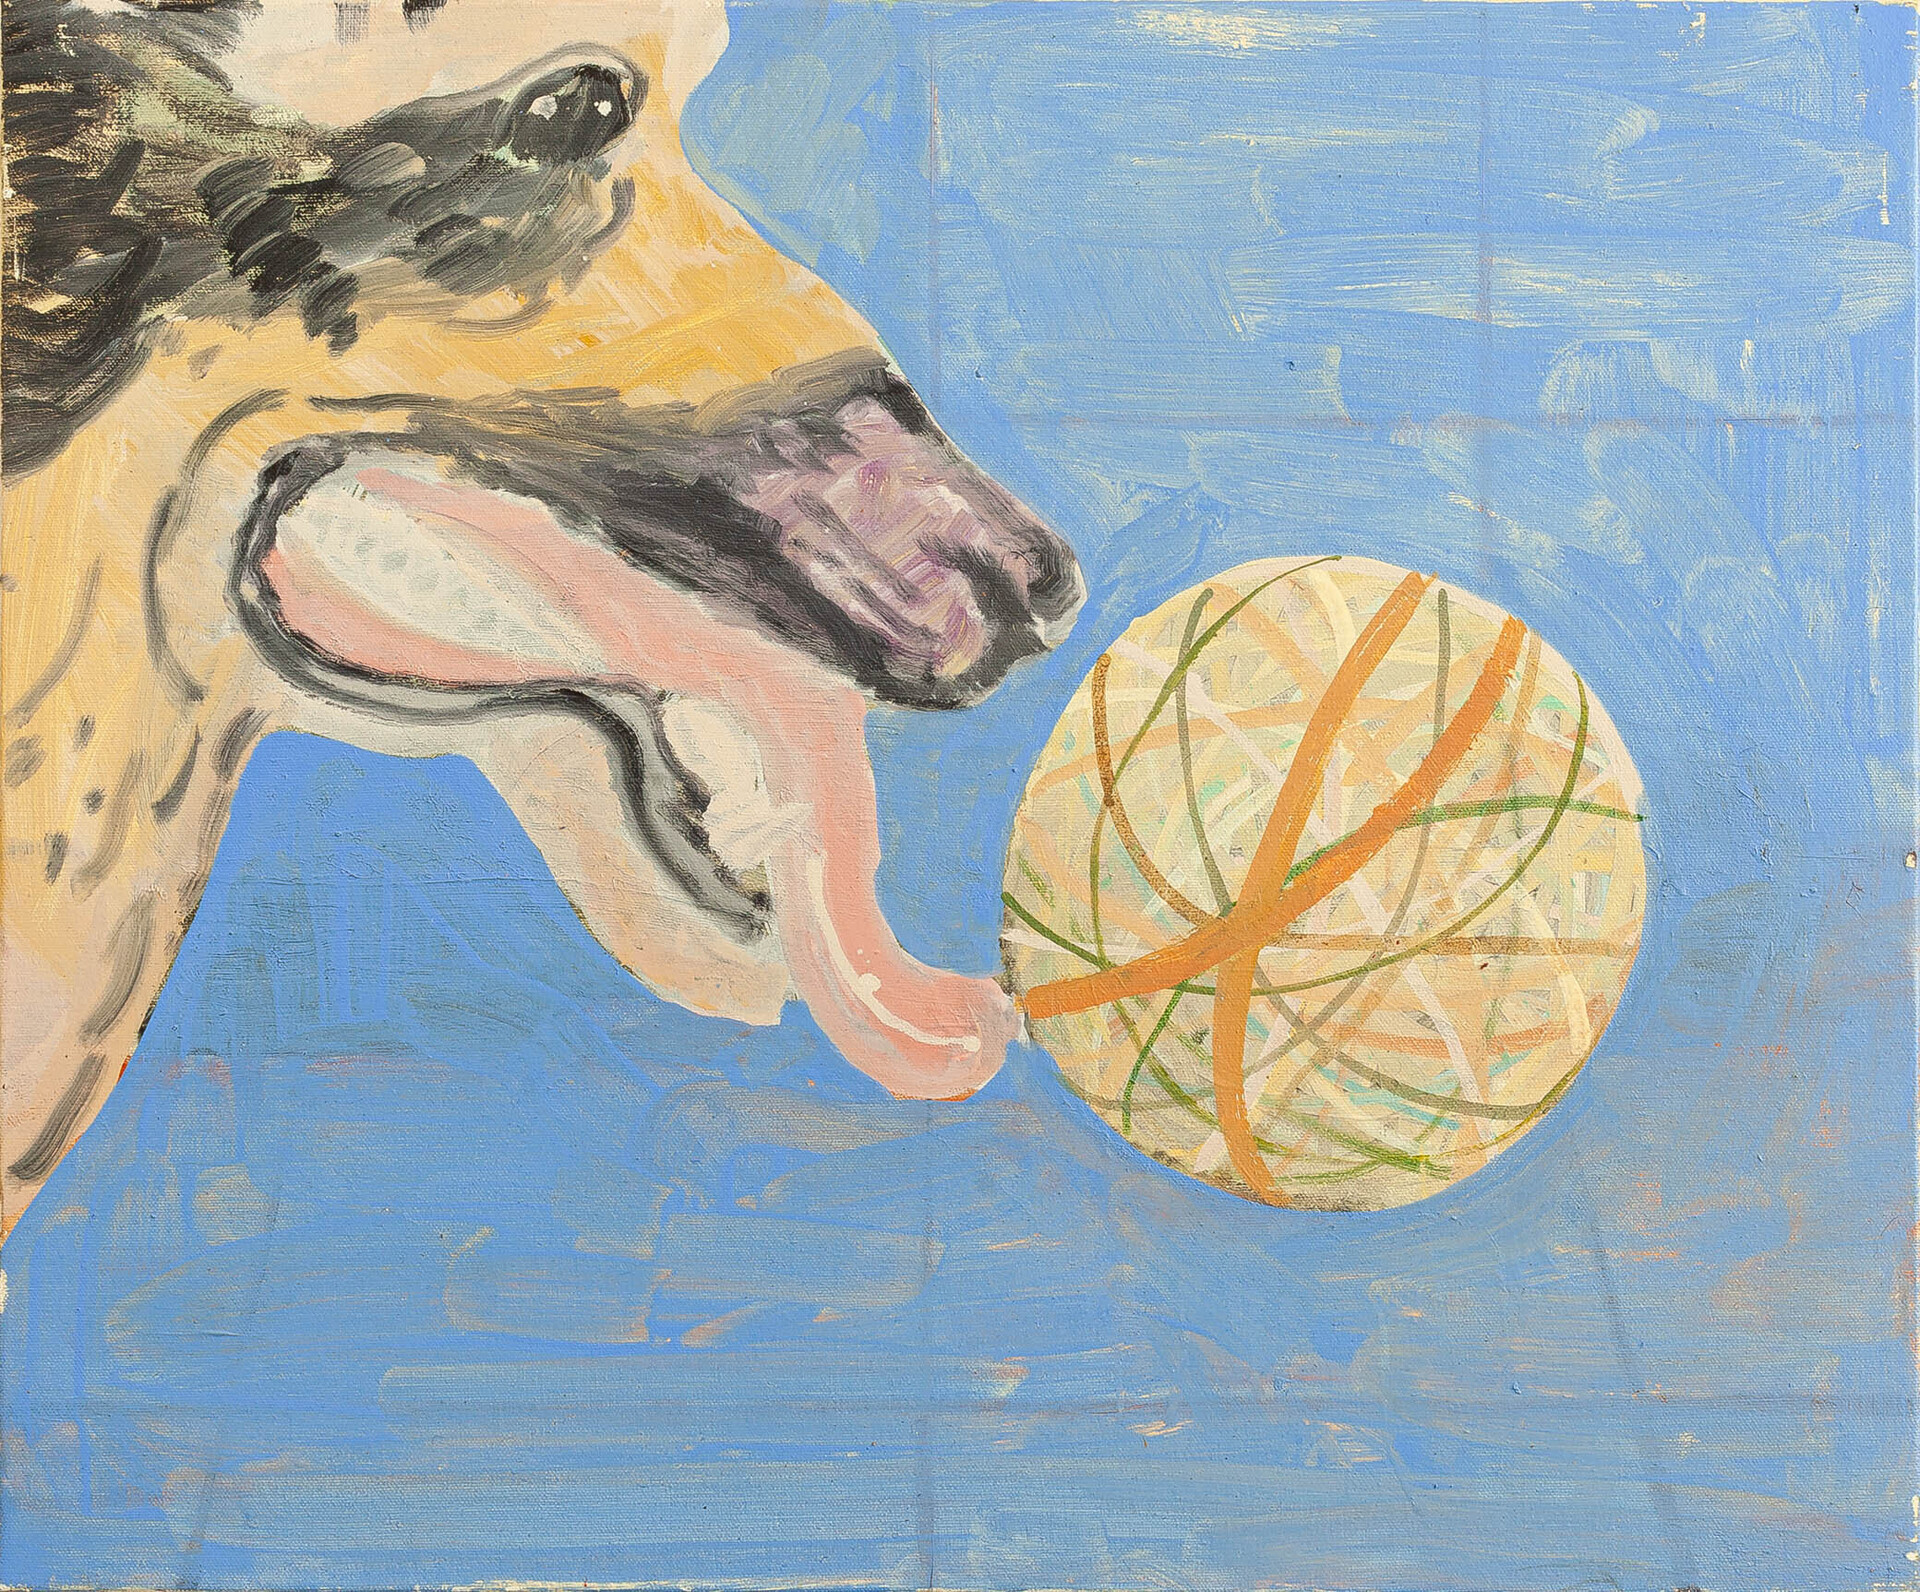 Travis MacDonald The German Shepherd with her ball of rubber bands, 2020 - 2021 oil on canvas 51 x 61cm